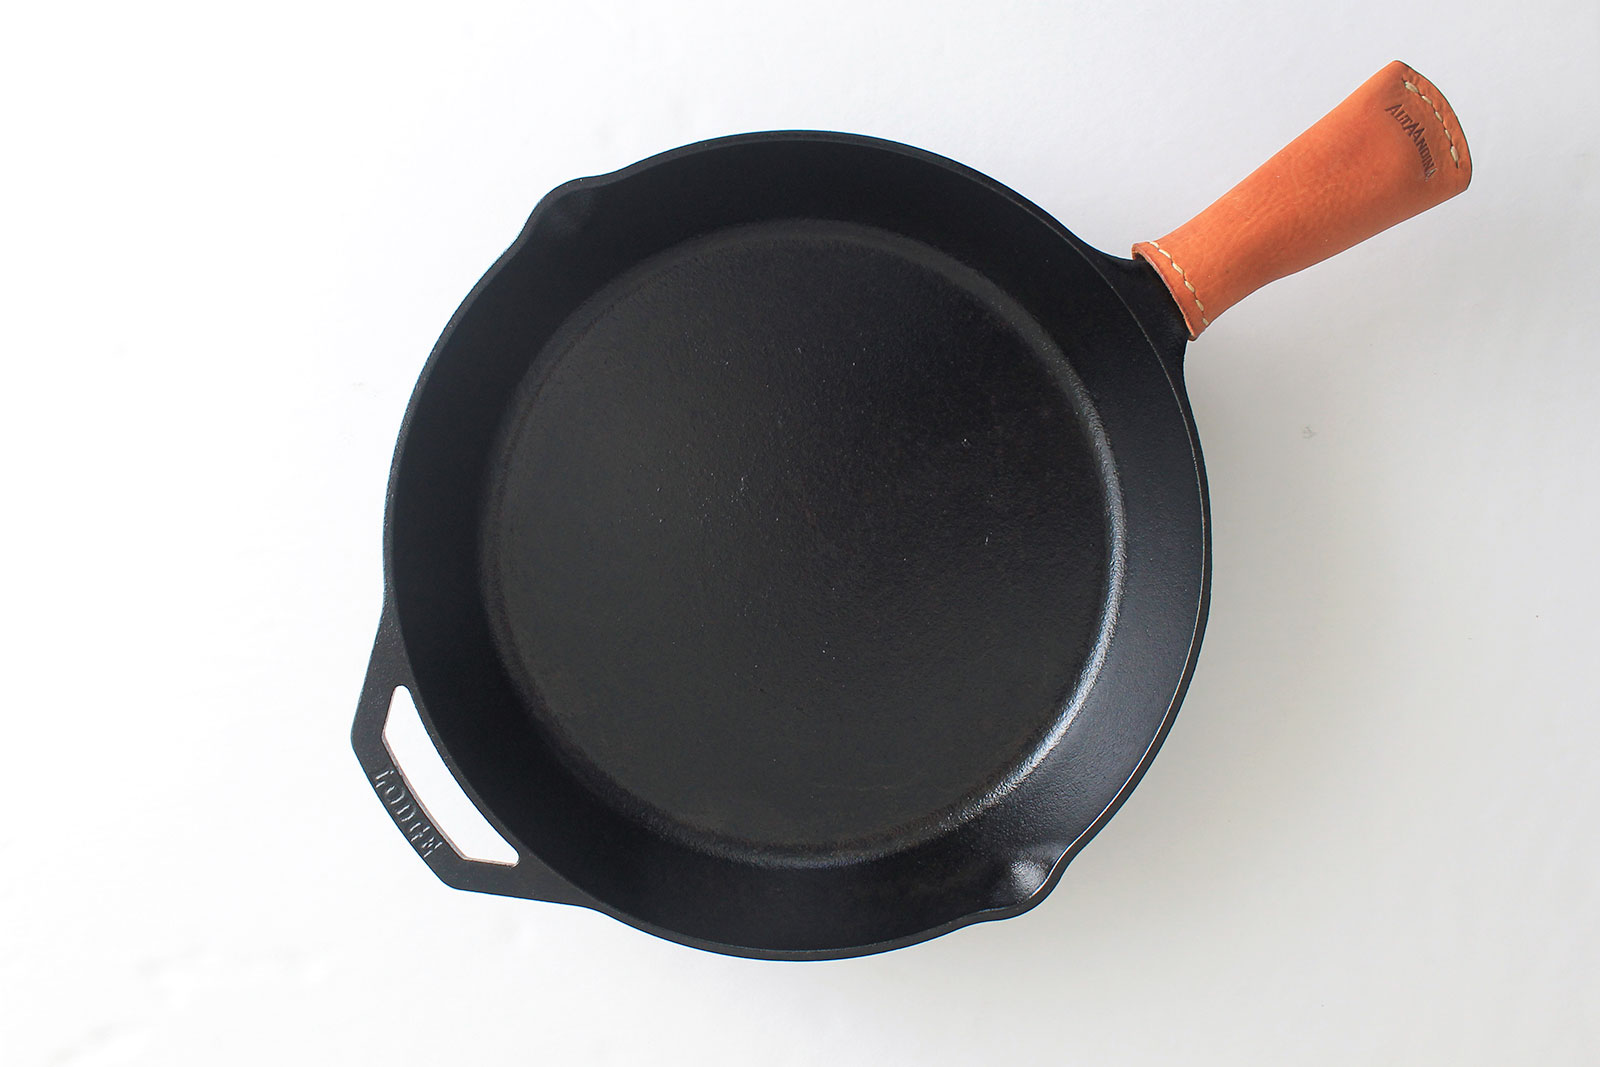 How to clean cast iron cookware